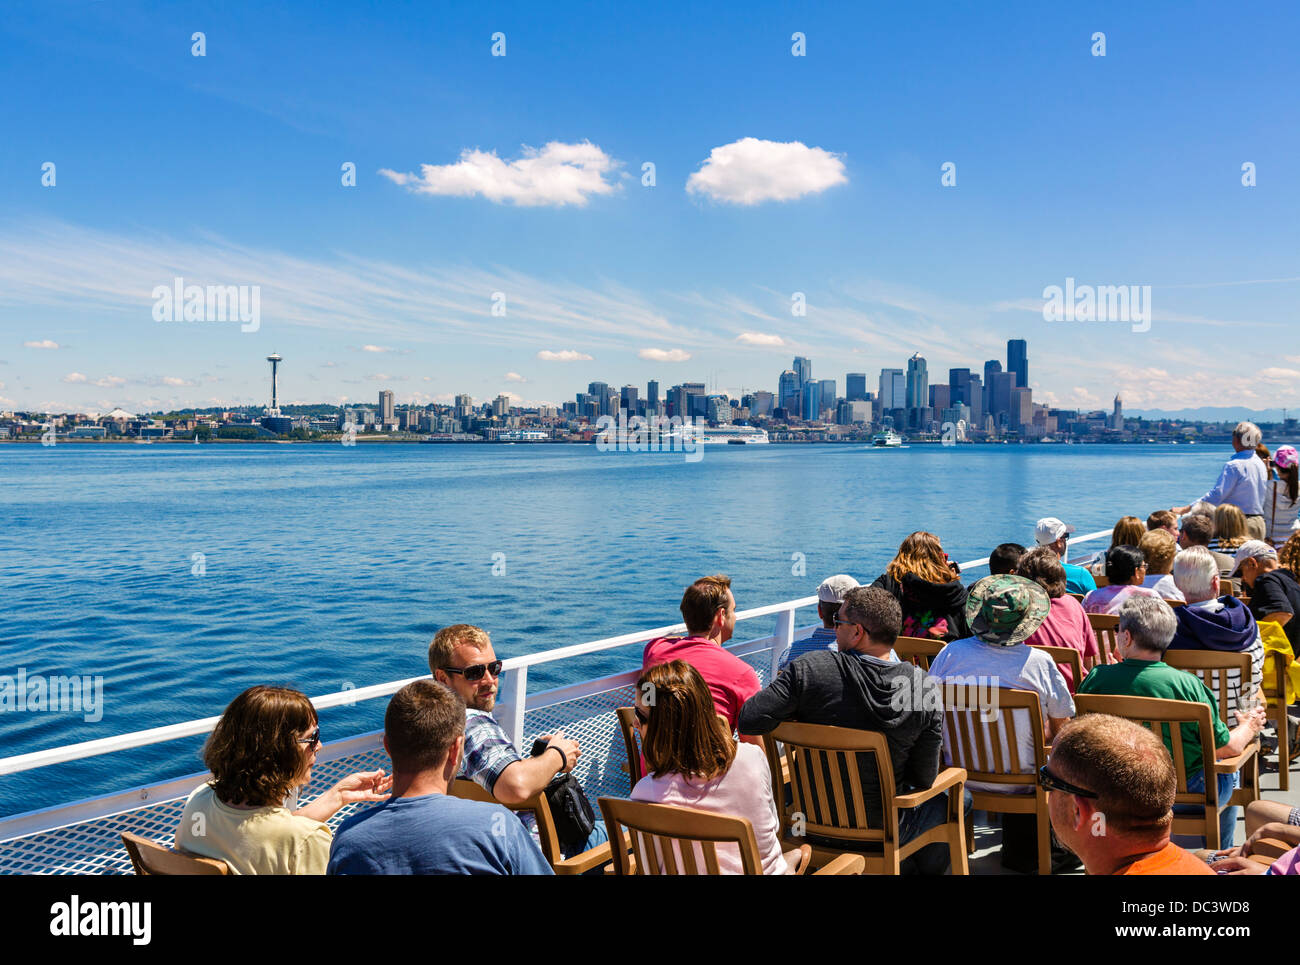 Downtown skyline from a harbor cruise round Puget Sound, Seattle, Washington, USA Stock Photo